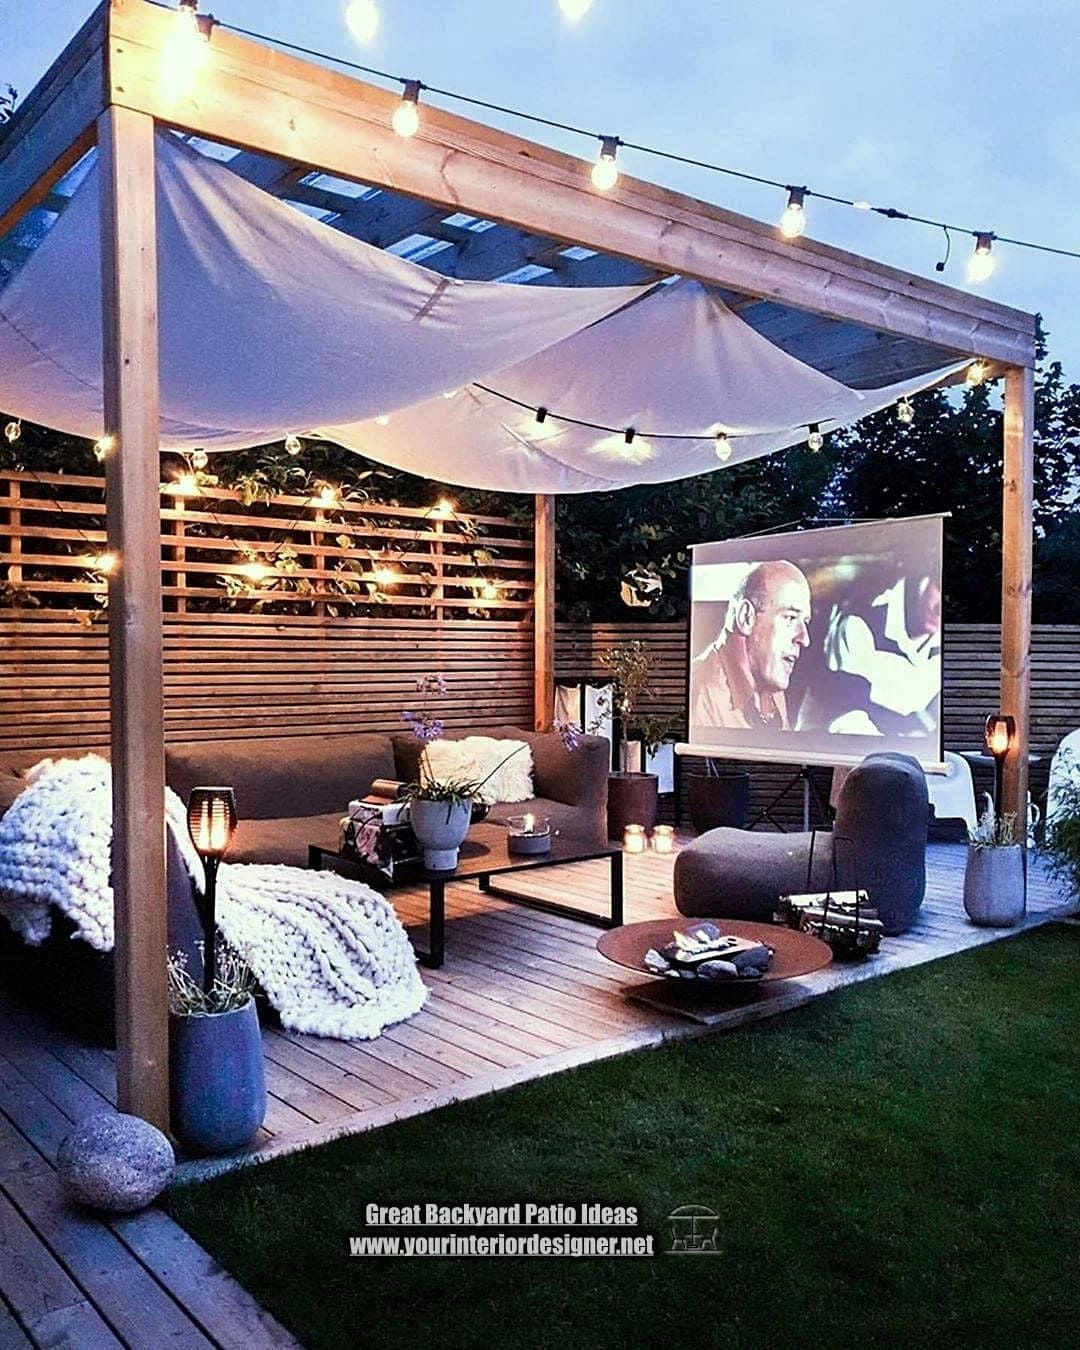 Unique Patio Ideas For Backyards Or Other Outdoor Areas | Page 25 of 44 | Your Interior Designer - Unique Patio Ideas For Backyards Or Other Outdoor Areas | Page 25 of 44 | Your Interior Designer -   18 diy Outdoor area ideas